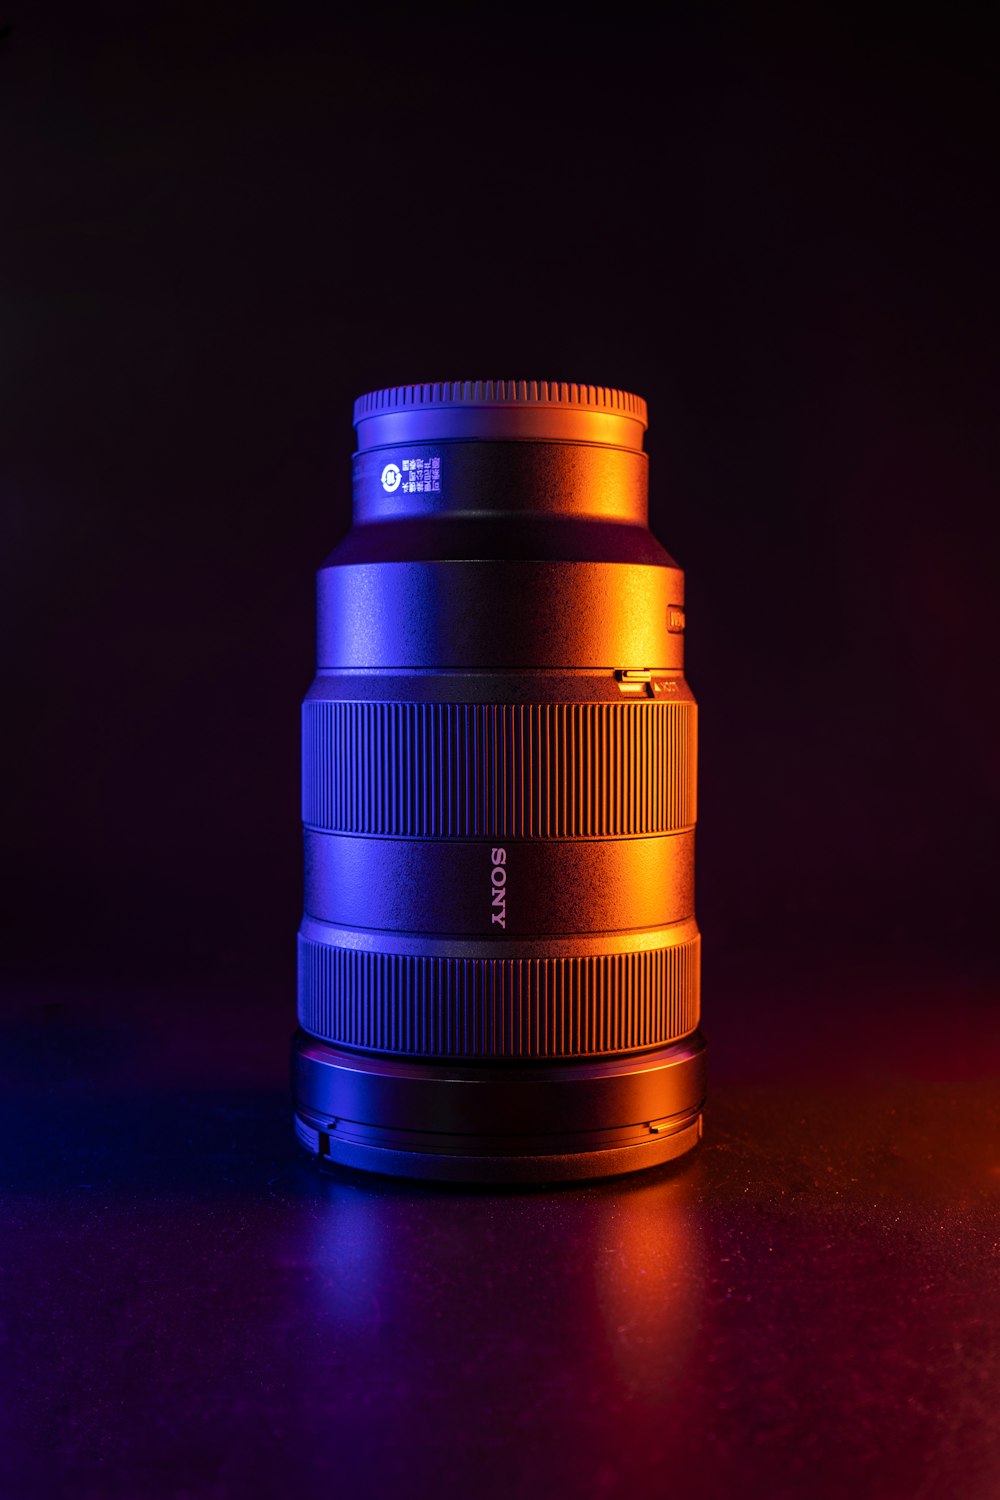 a close up of a camera lens on a table